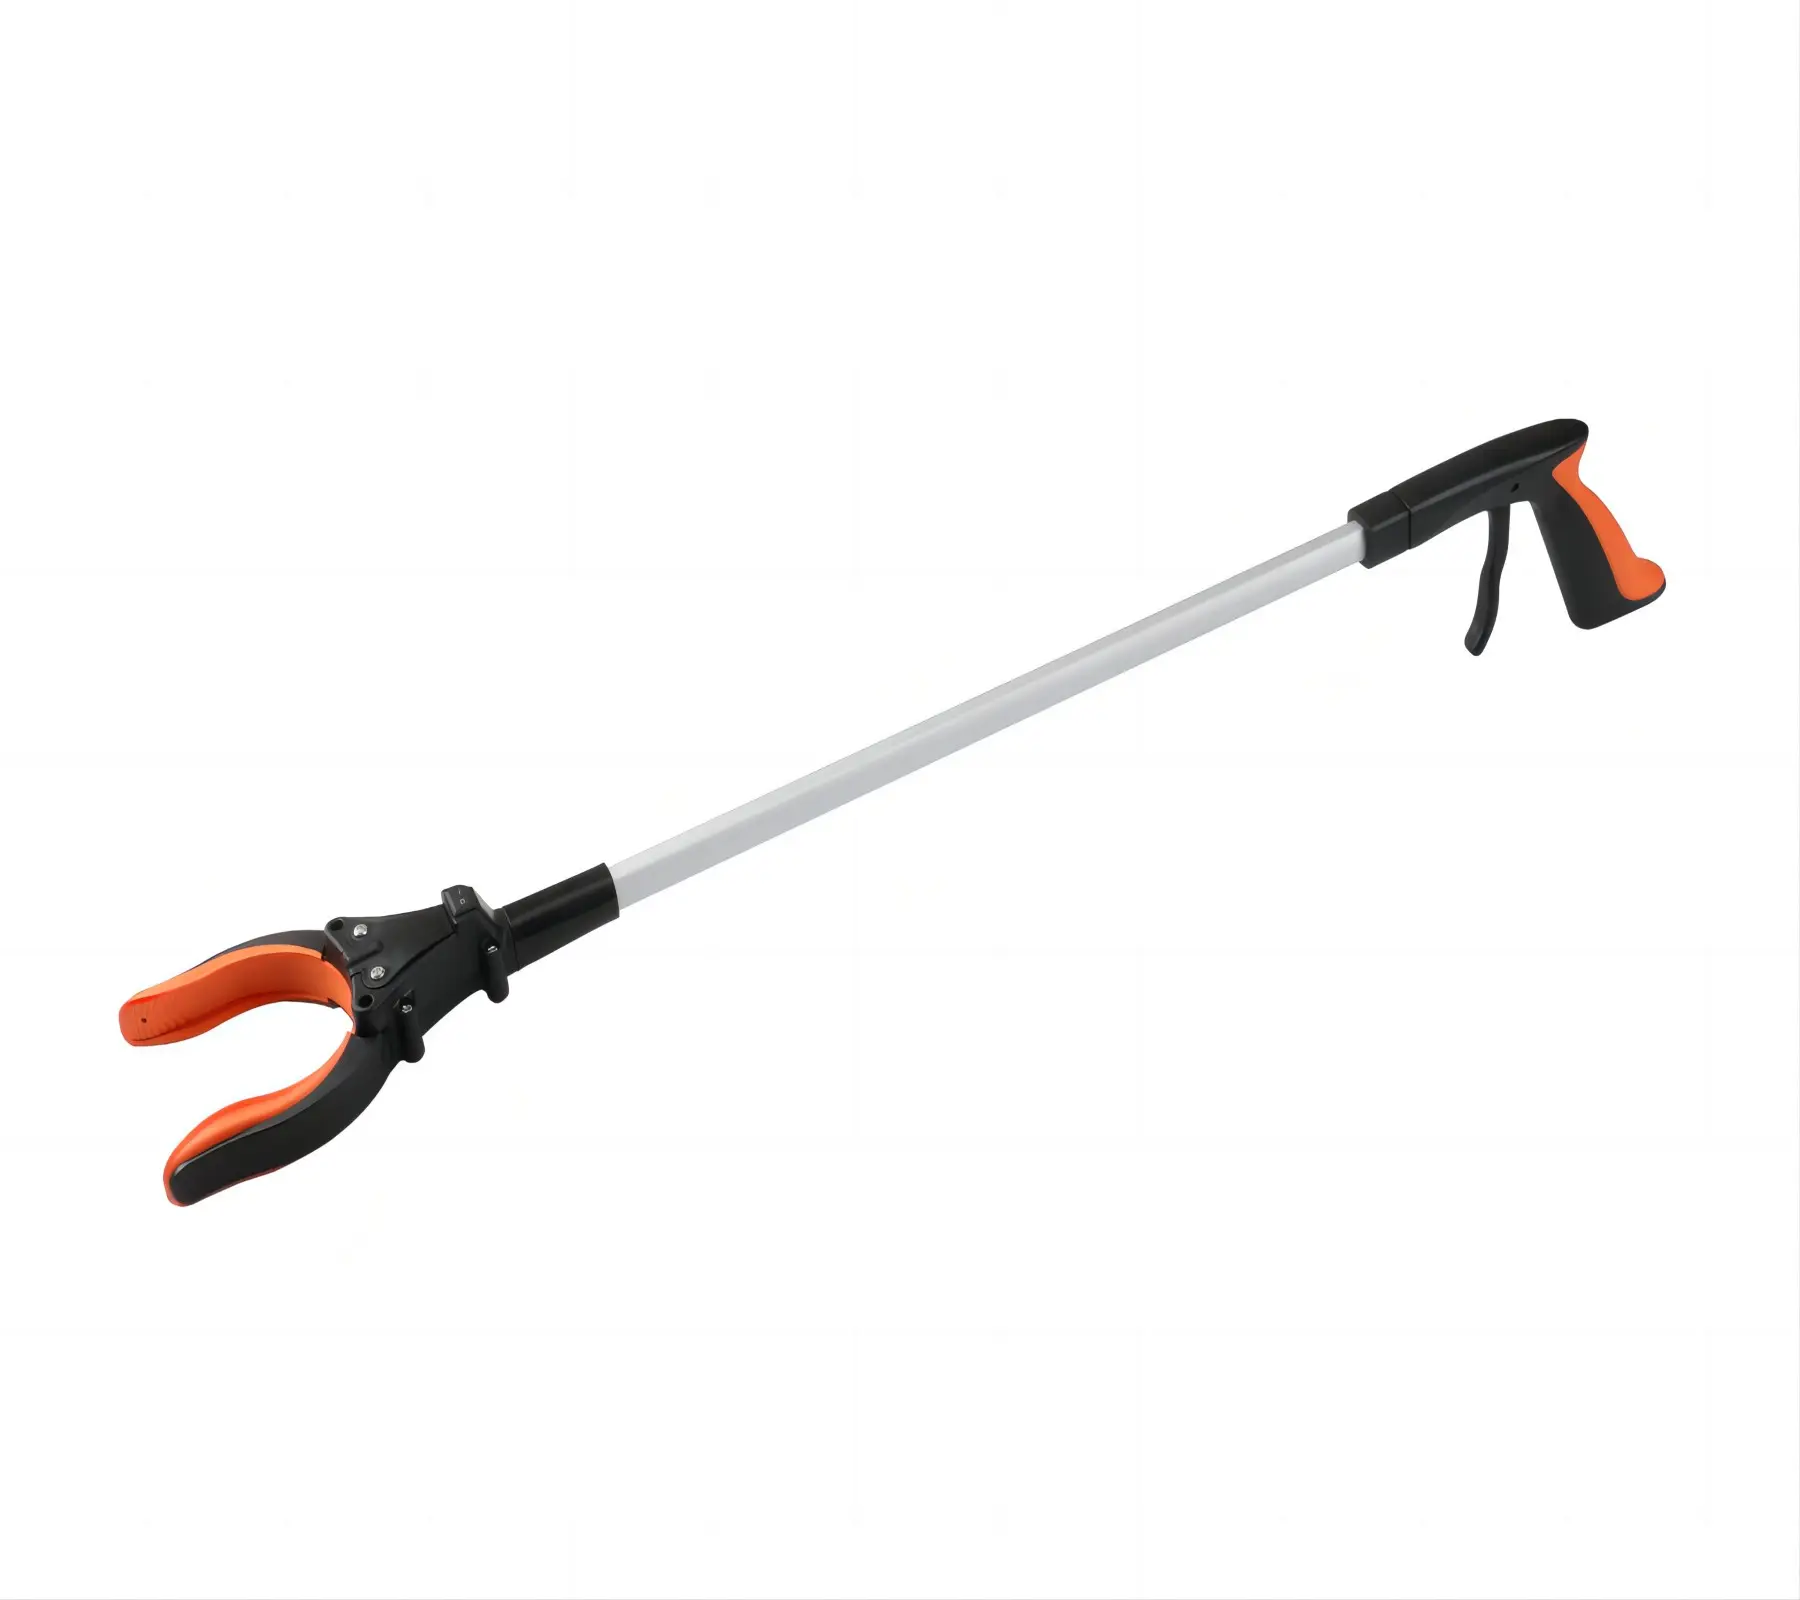 32 inch high quality extra long rotatable litter picker pick up reacher grabber tool with shoe horn